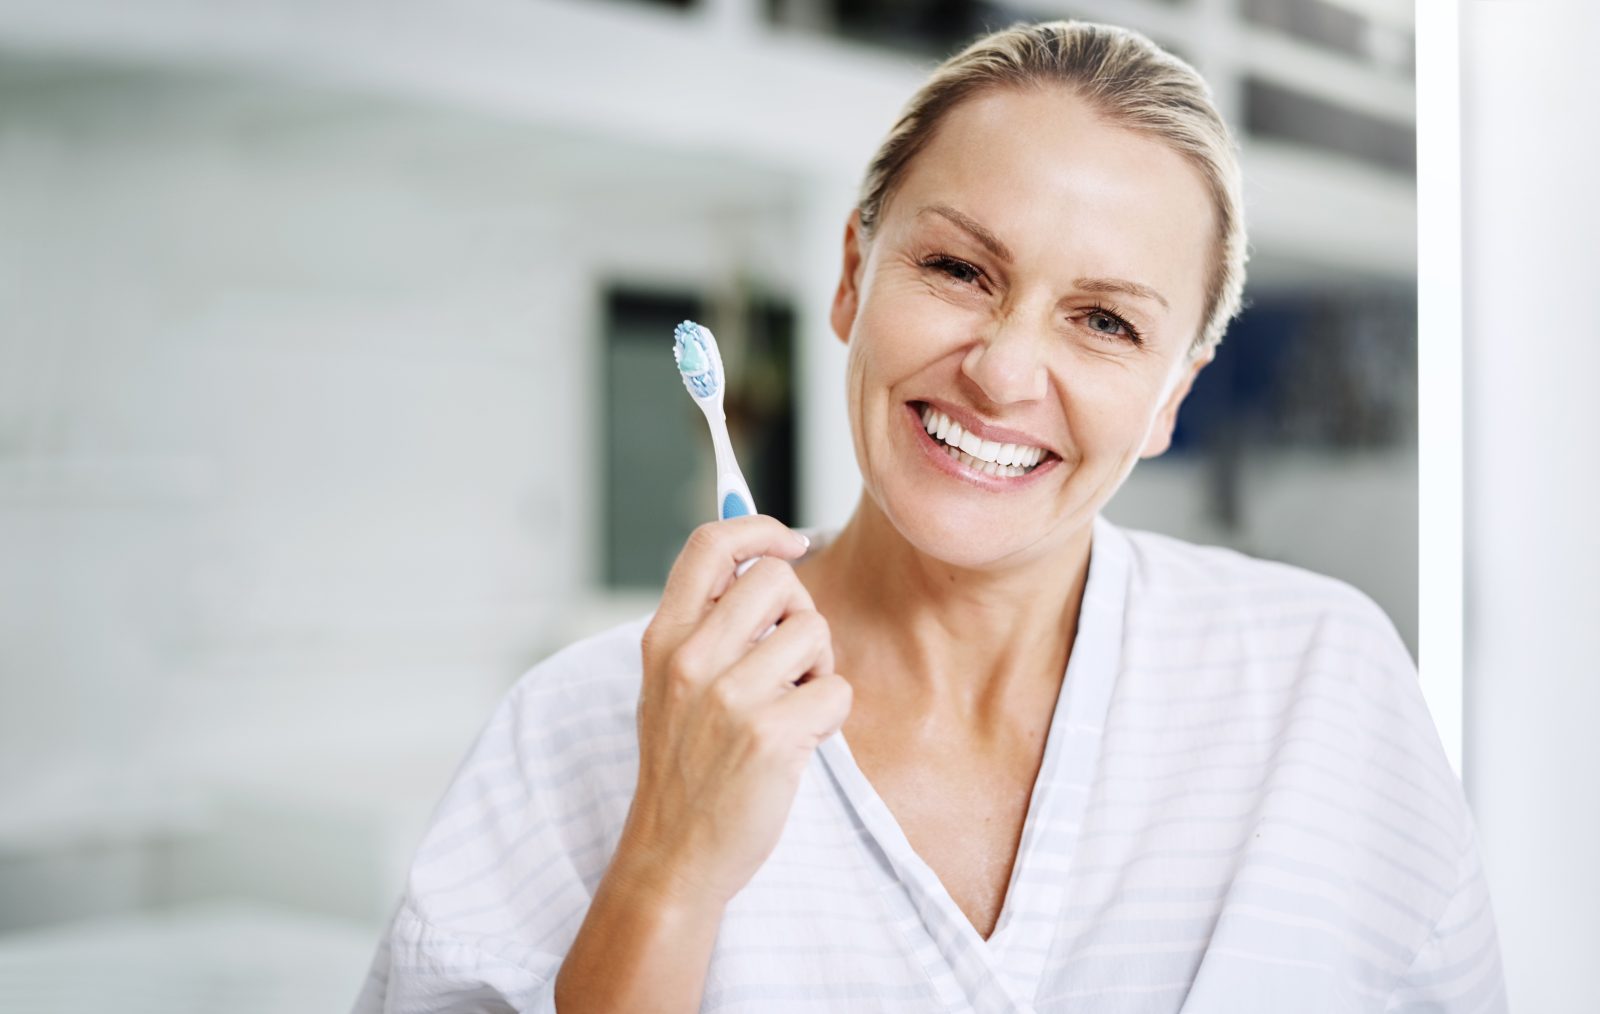 Something to smile about: Easy tips for healthier teeth